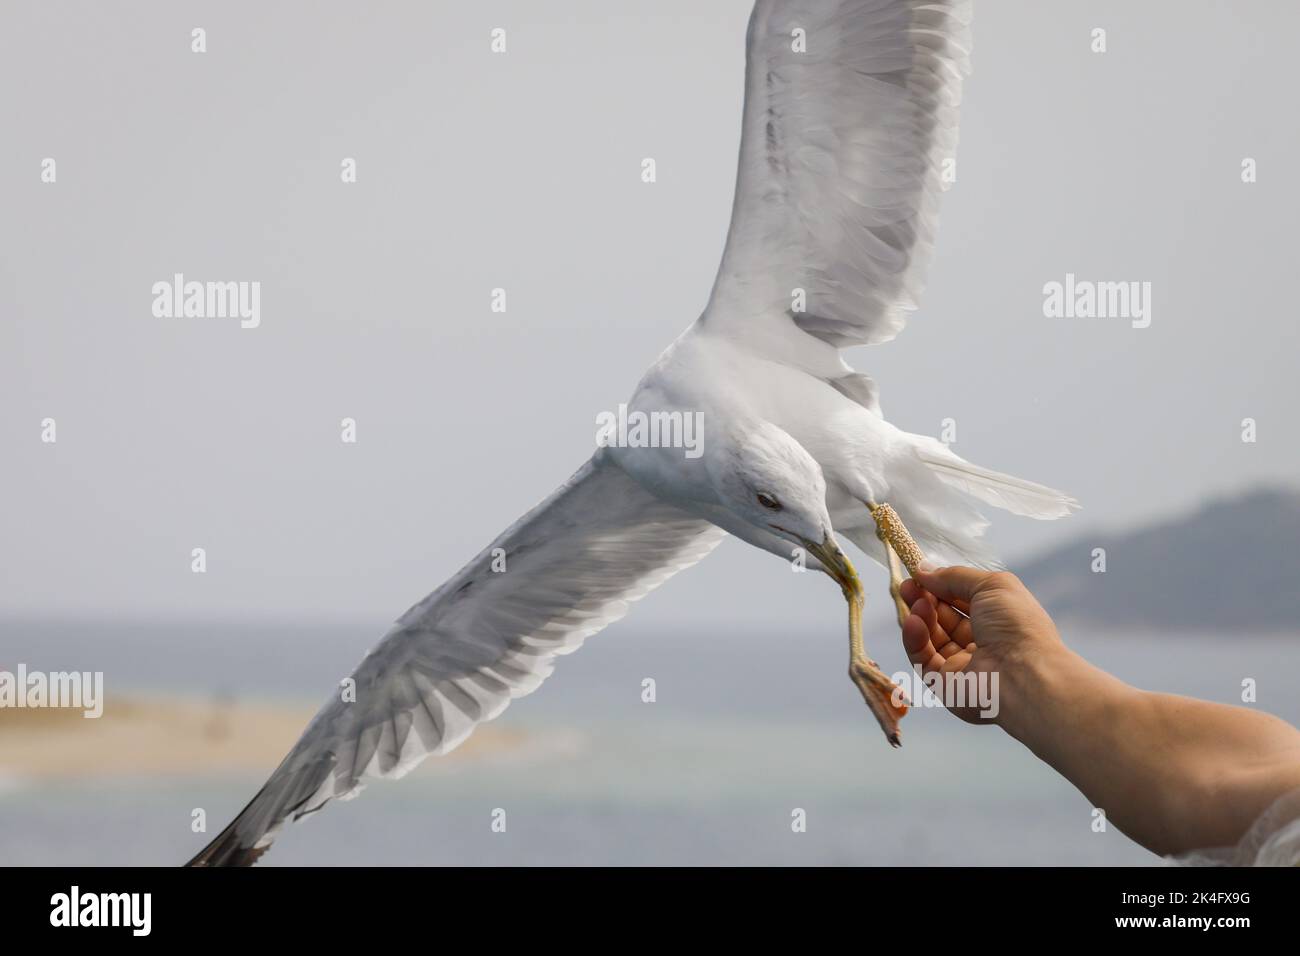 Sea bird picks up food from the hand of a person above the Aegean Sea on the Greek island of Thassos on a sunny summer day. Stock Photo